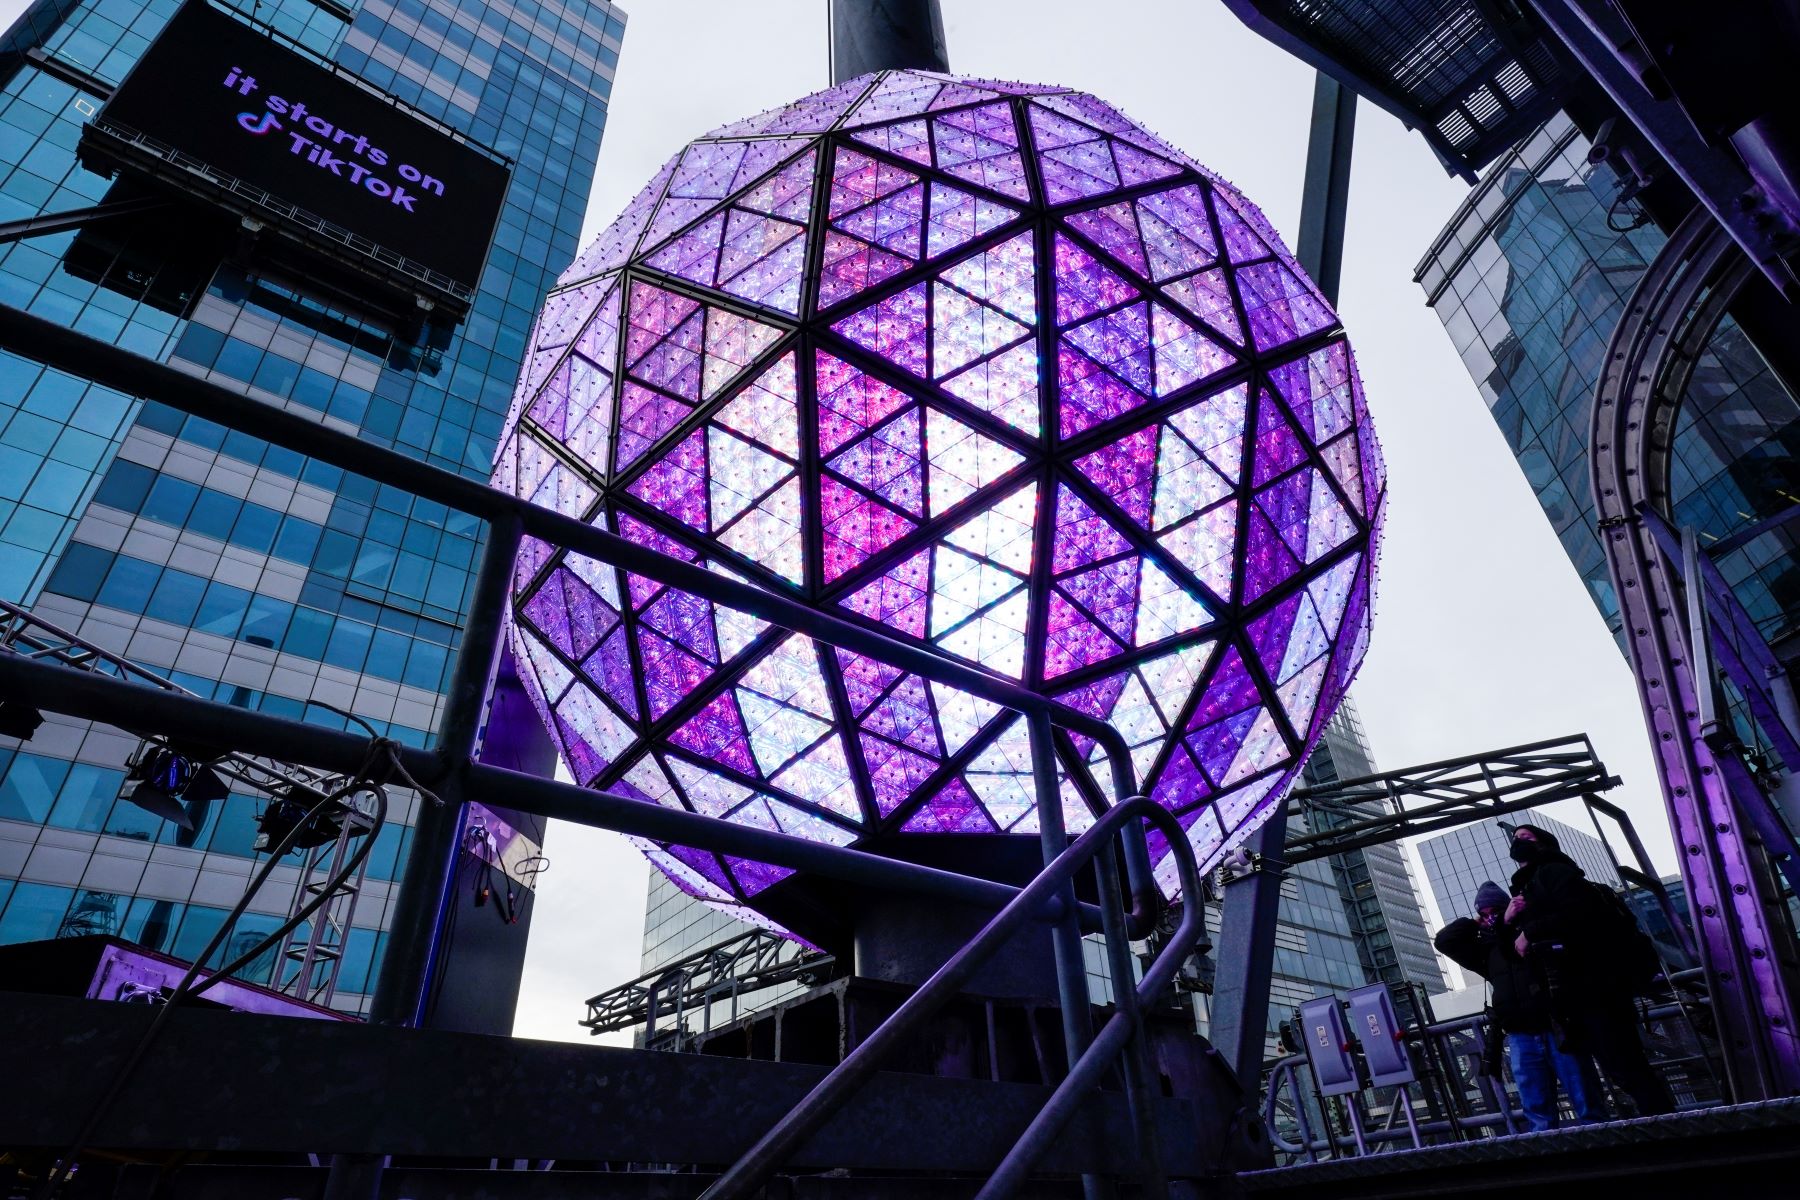 How To Watch The Ball Drop In Nyc